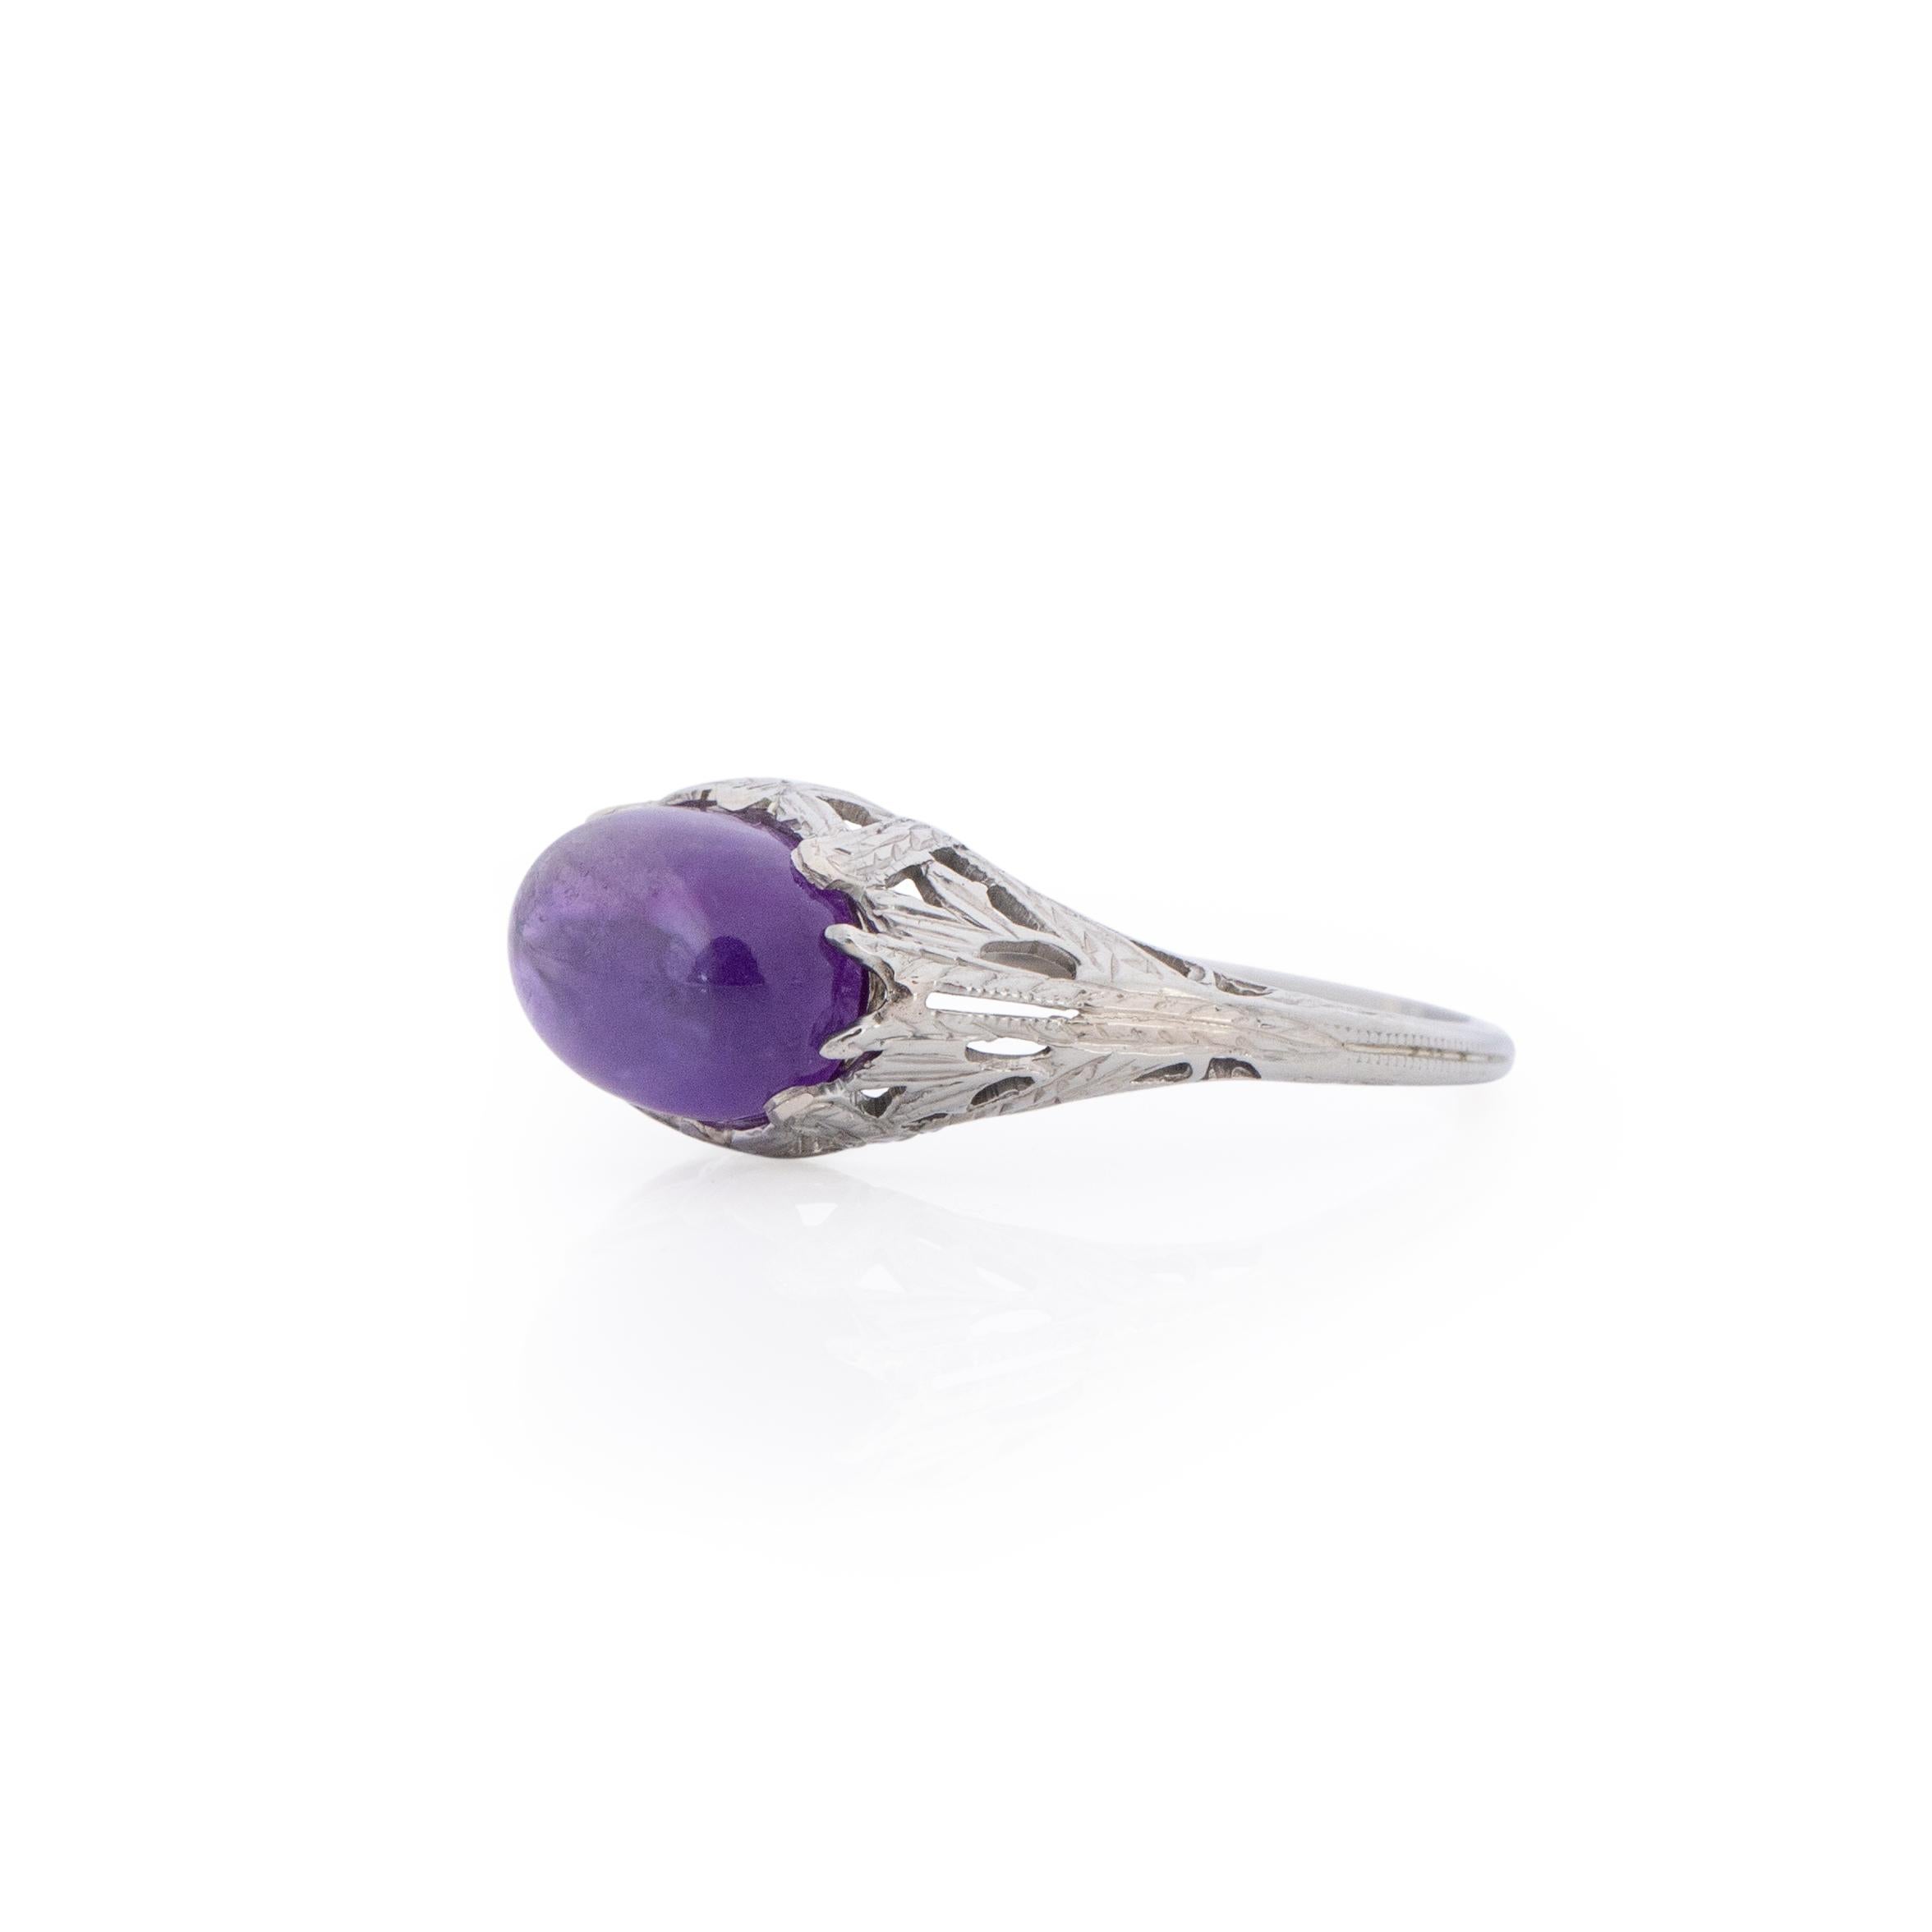 This unique beauty, is a amethyst lovers dream. The vibrant purple amethyst cabochon sits in a breathtaking 18k white gold filigree mount. the filigree design wraps around the amethyst giving it a unique look that makes this art deco ring one of a